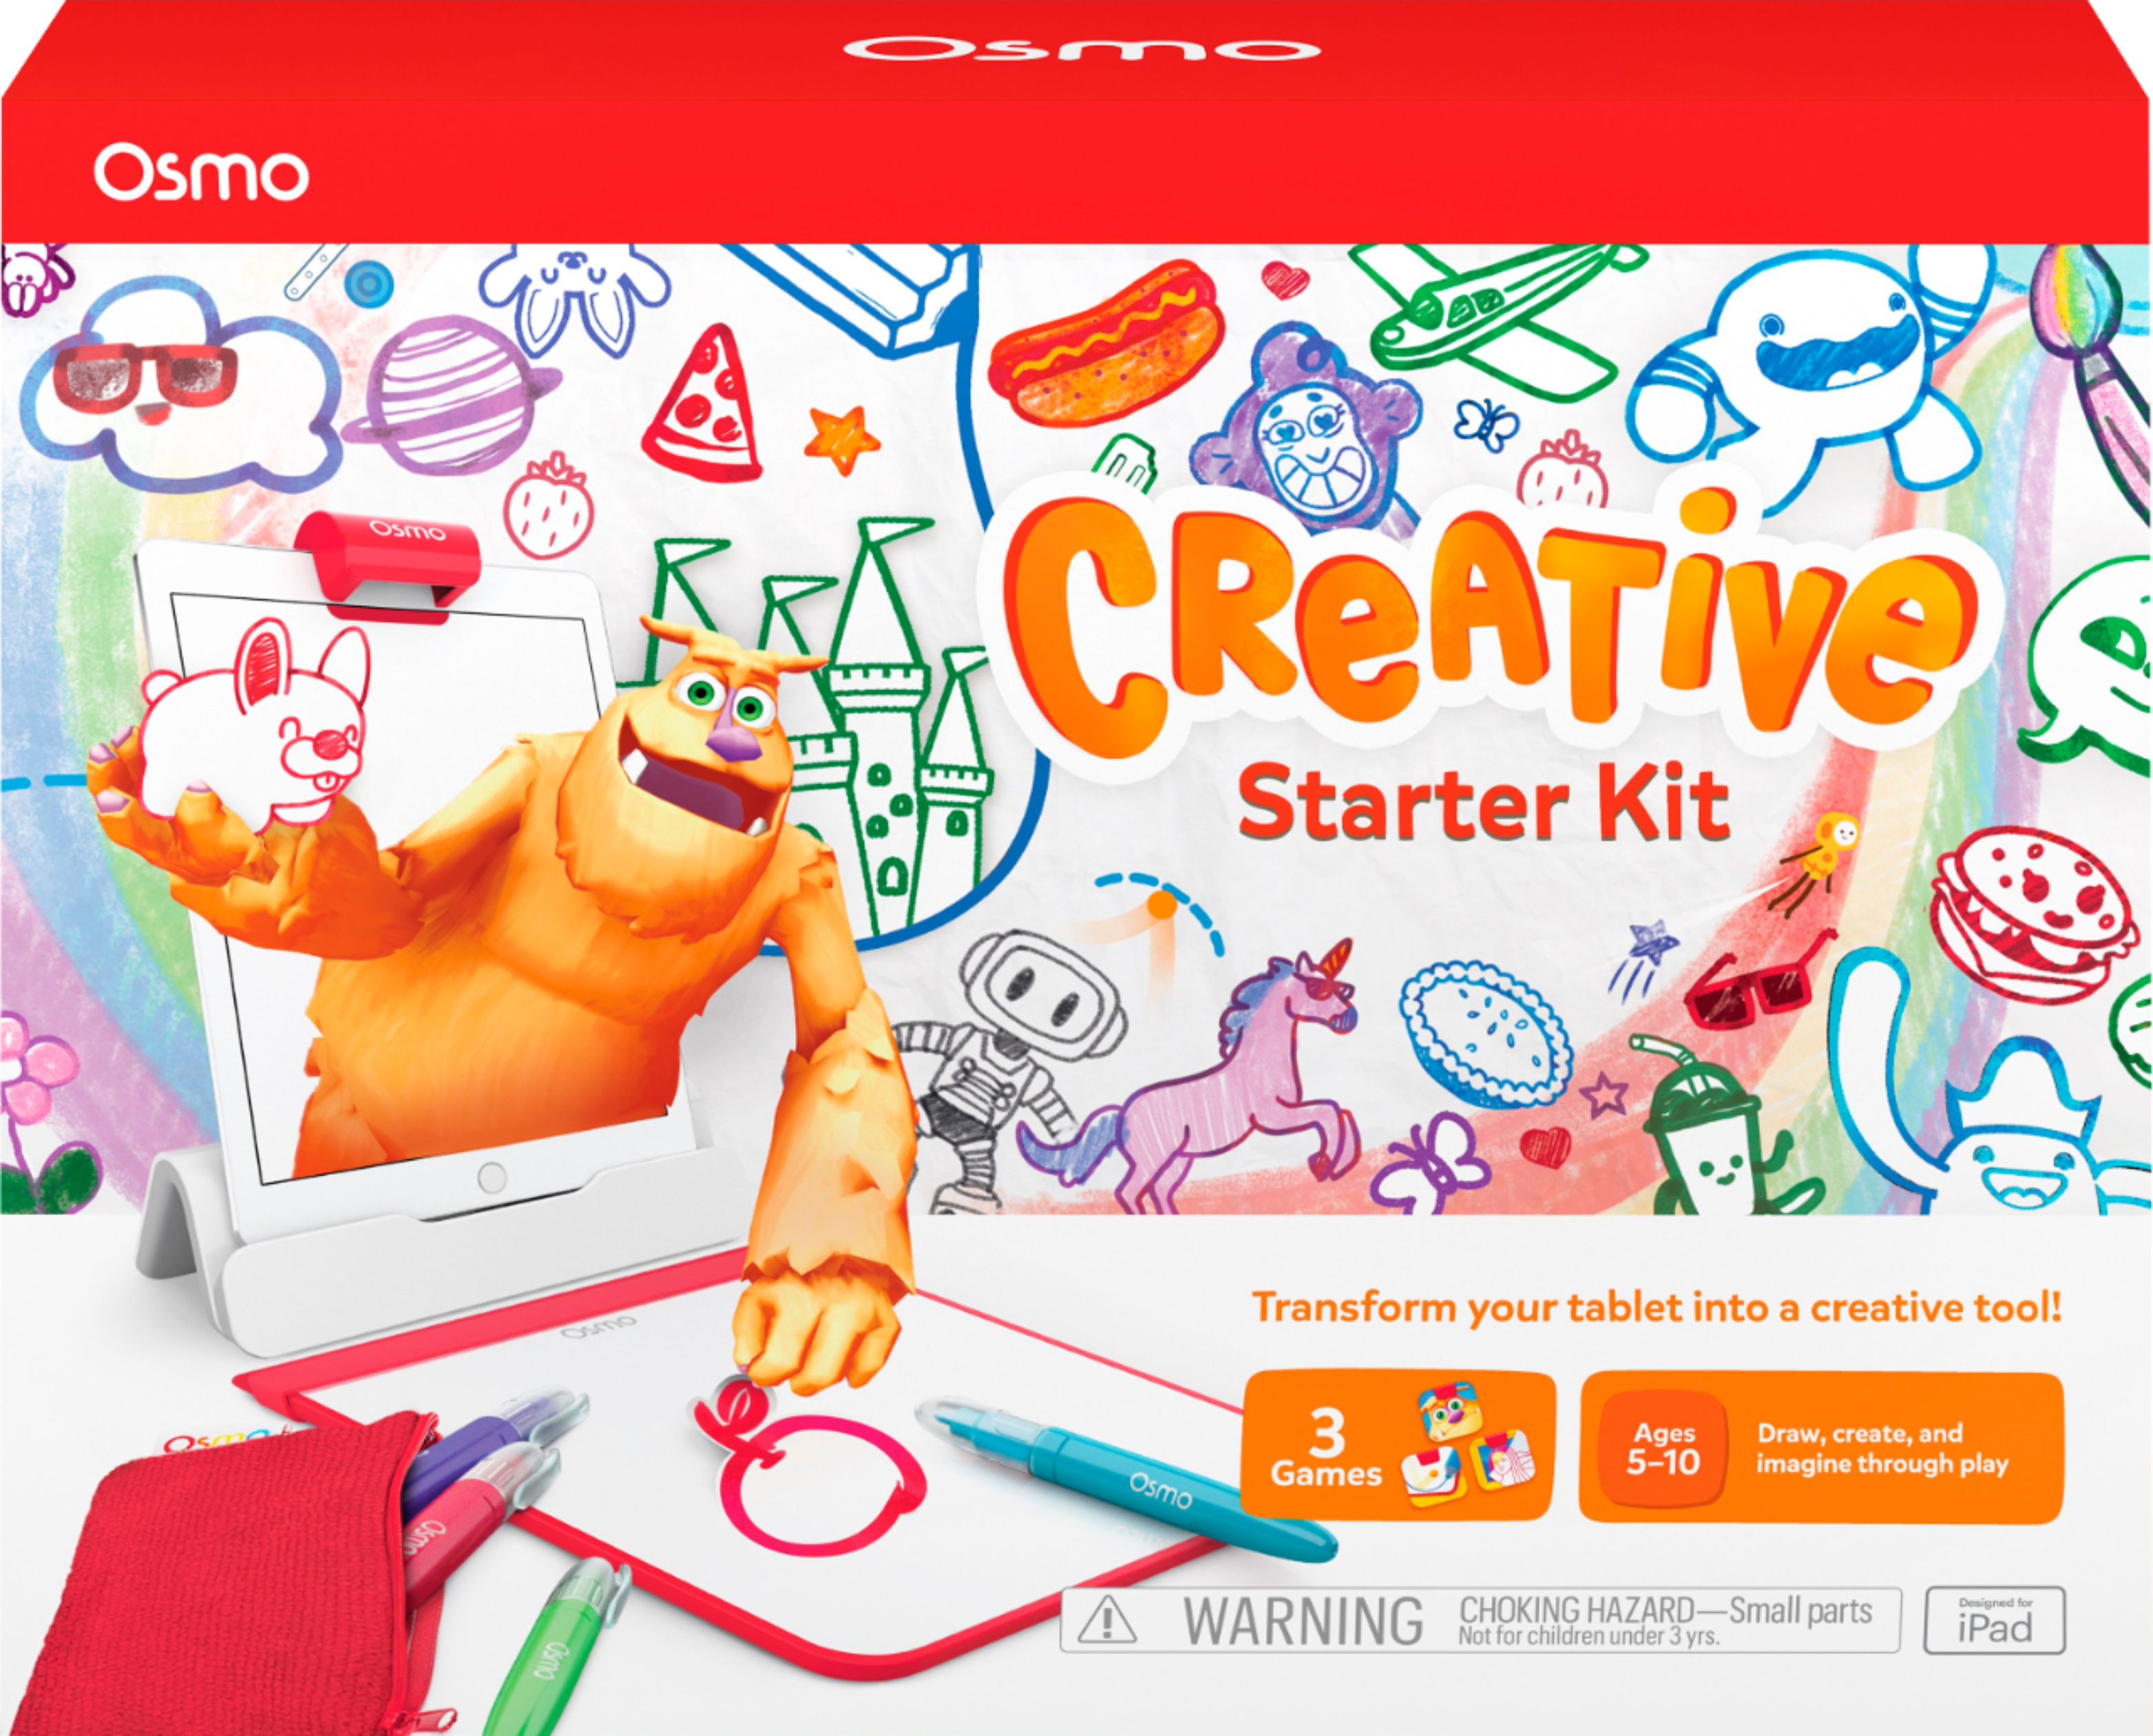 Osmo Creative Starter Kit for Fire Tablet 3 Educational Learning Games Ages 5-10 for sale online 